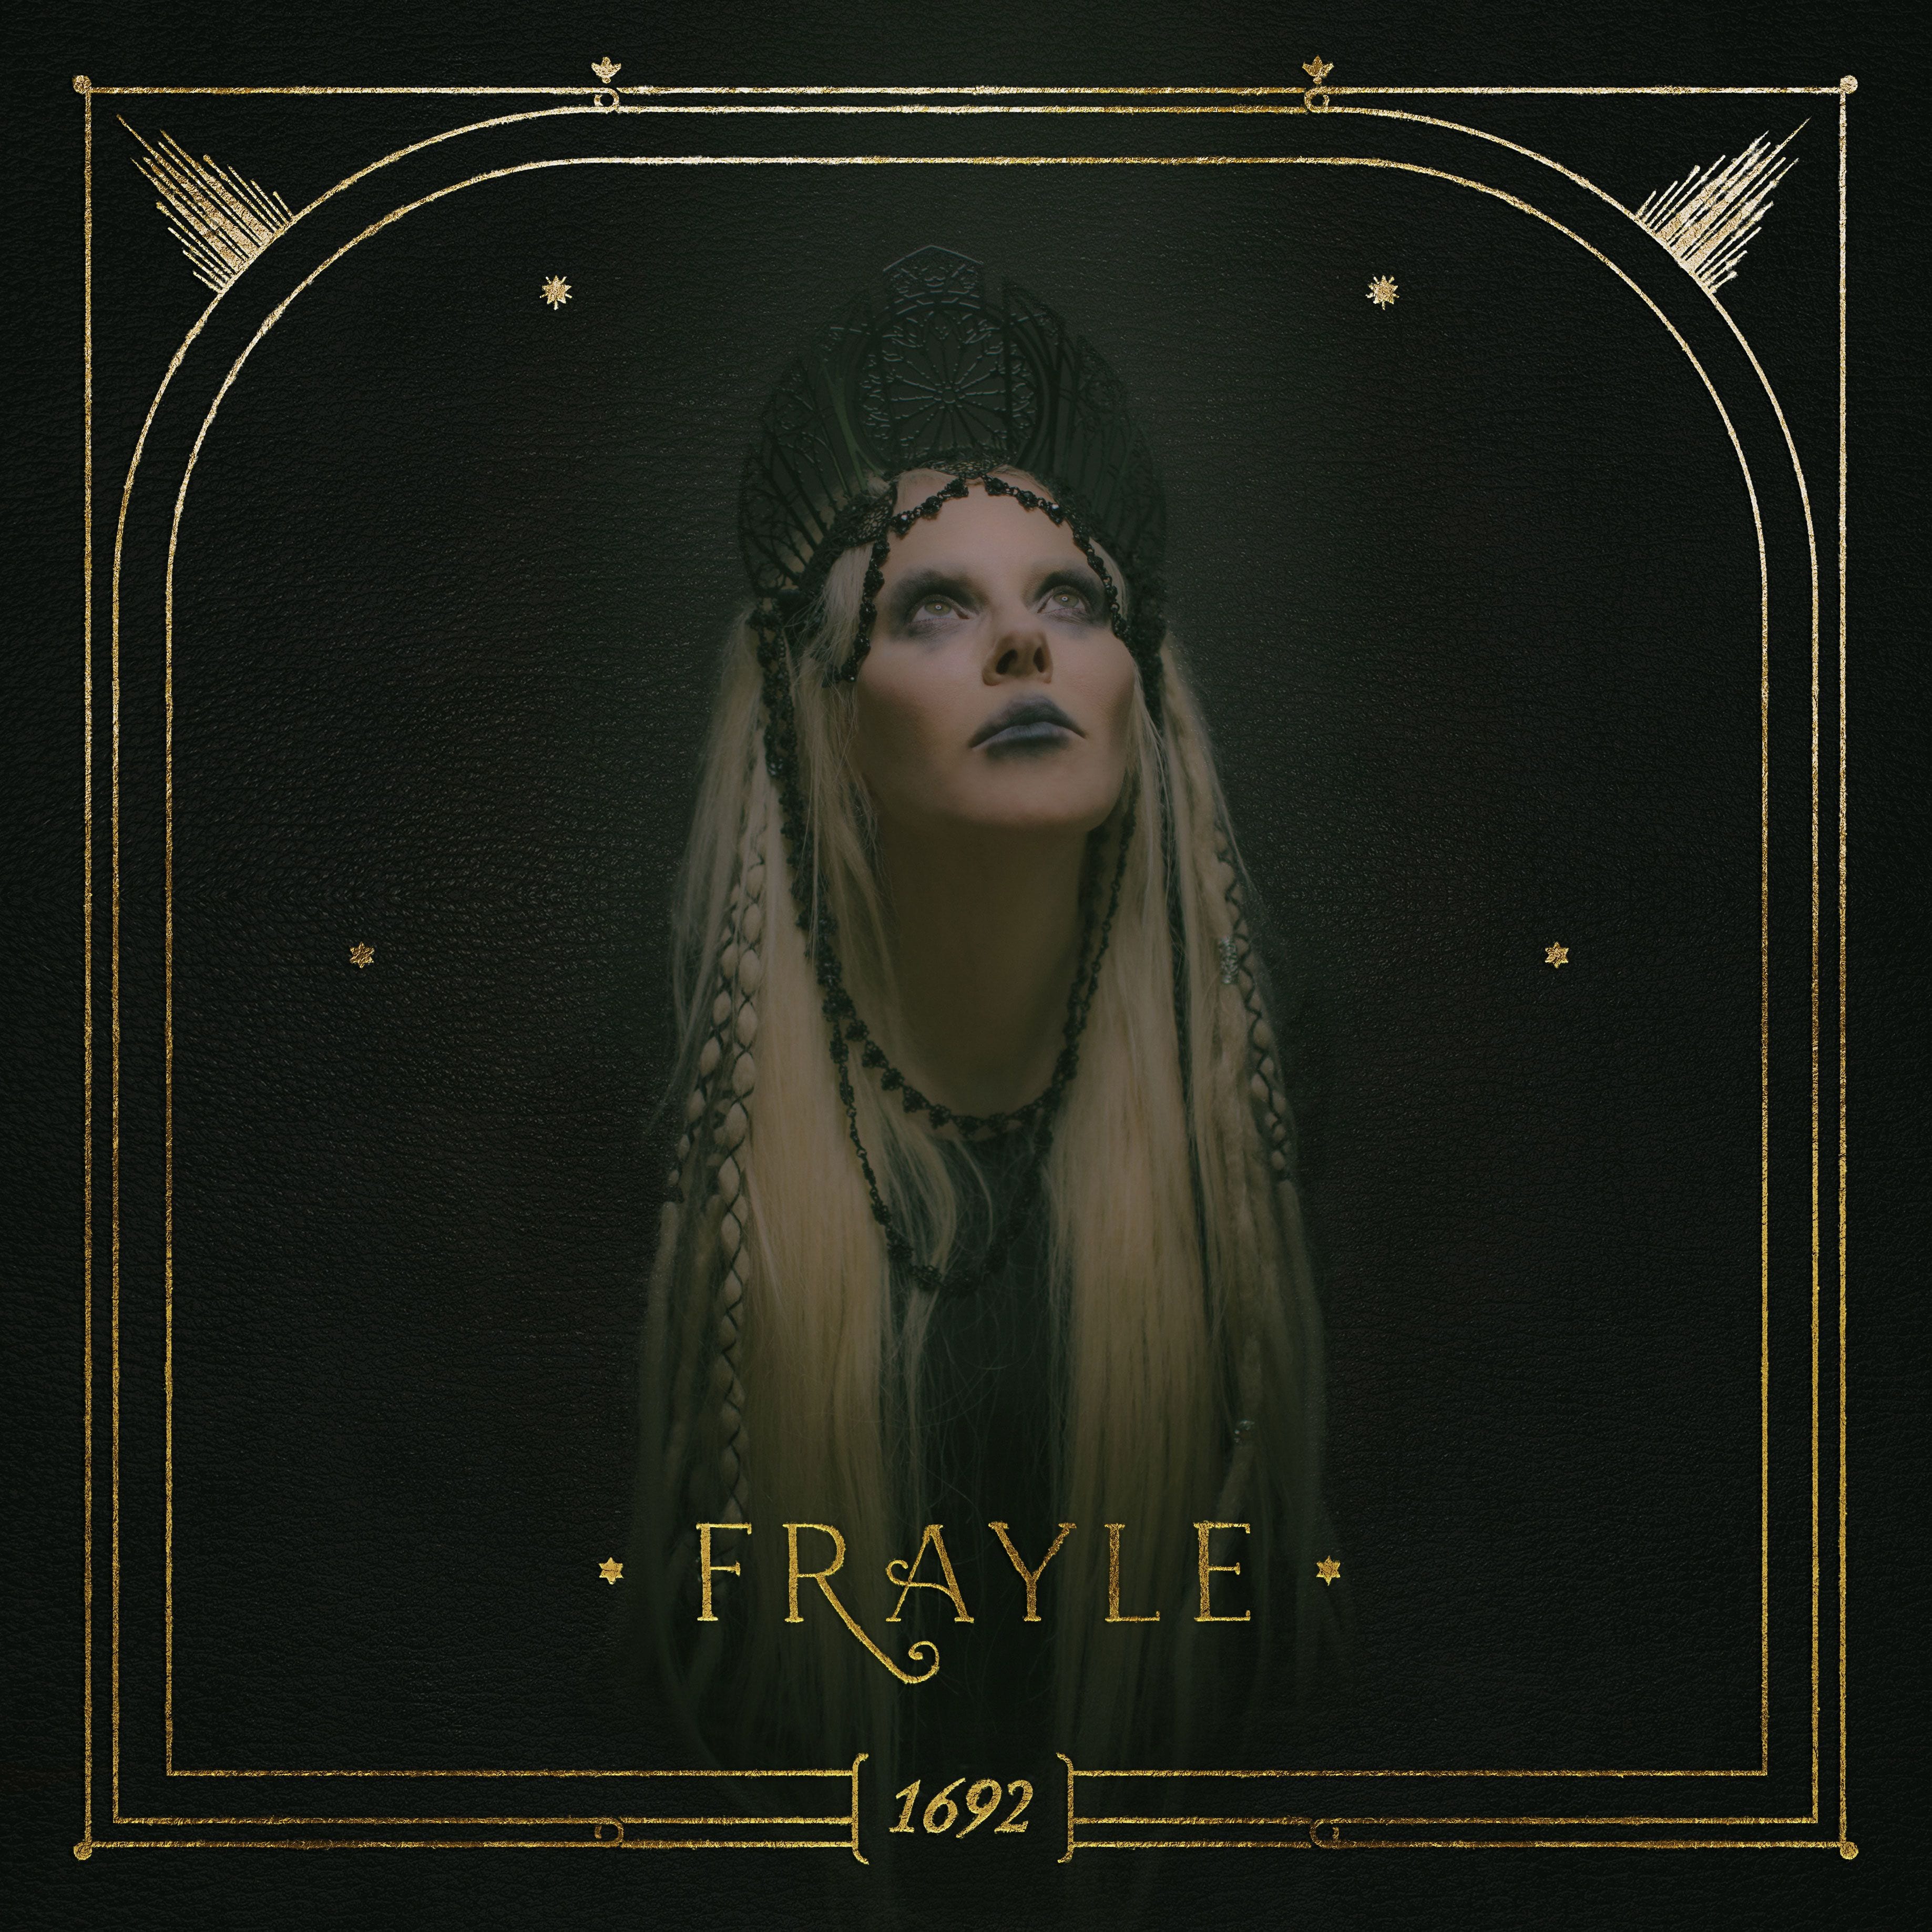 Frayle Deliver Anthems for the Persecuted Via ‘1692’ (album stream) (premiere)